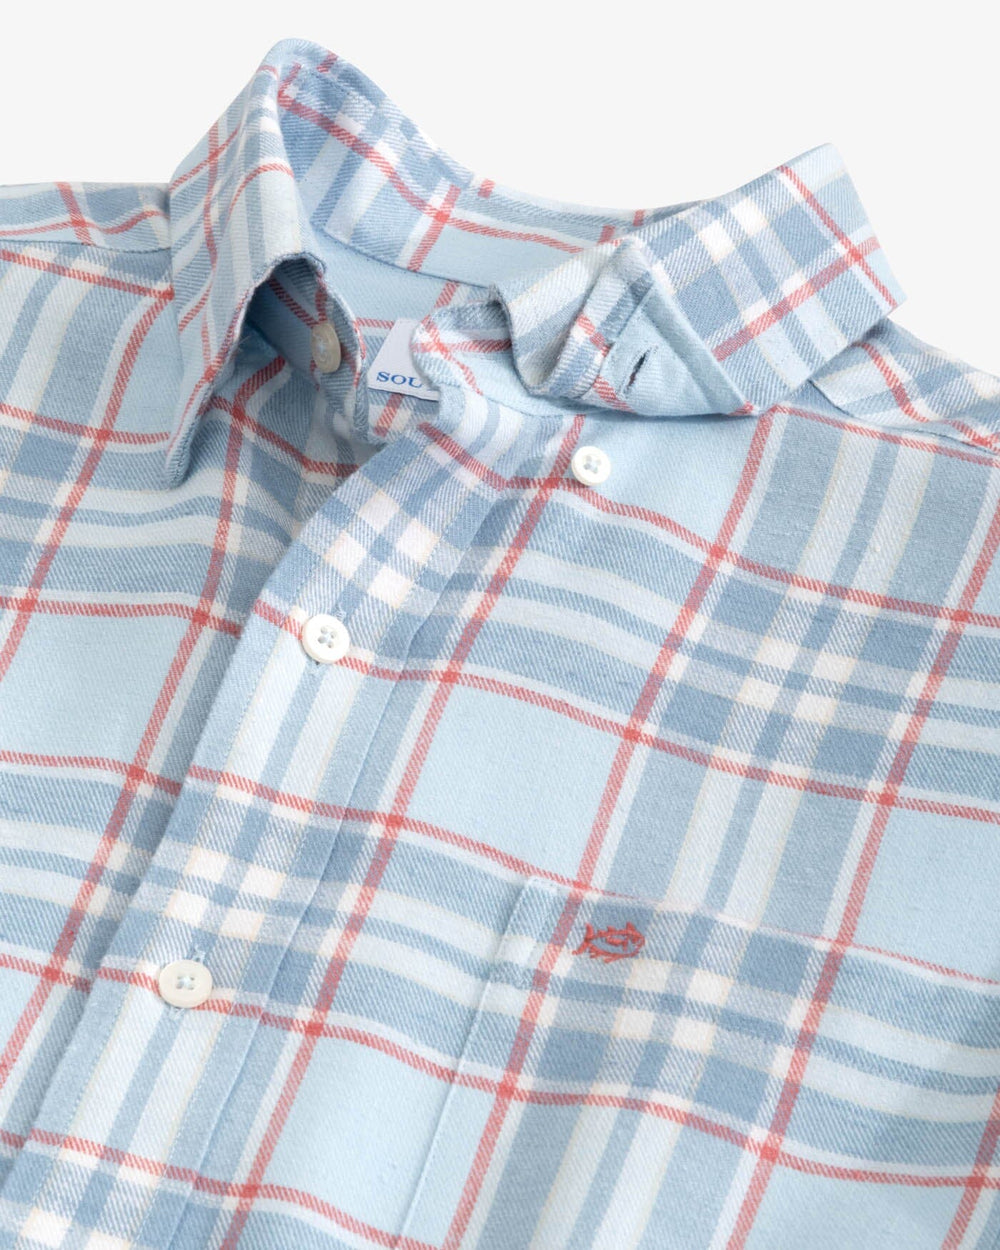 The detail view of the Southern Tide Beach Flannel Heather Reddick Plaid Sport Shirt by Southern Tide - Heather Dream Blue